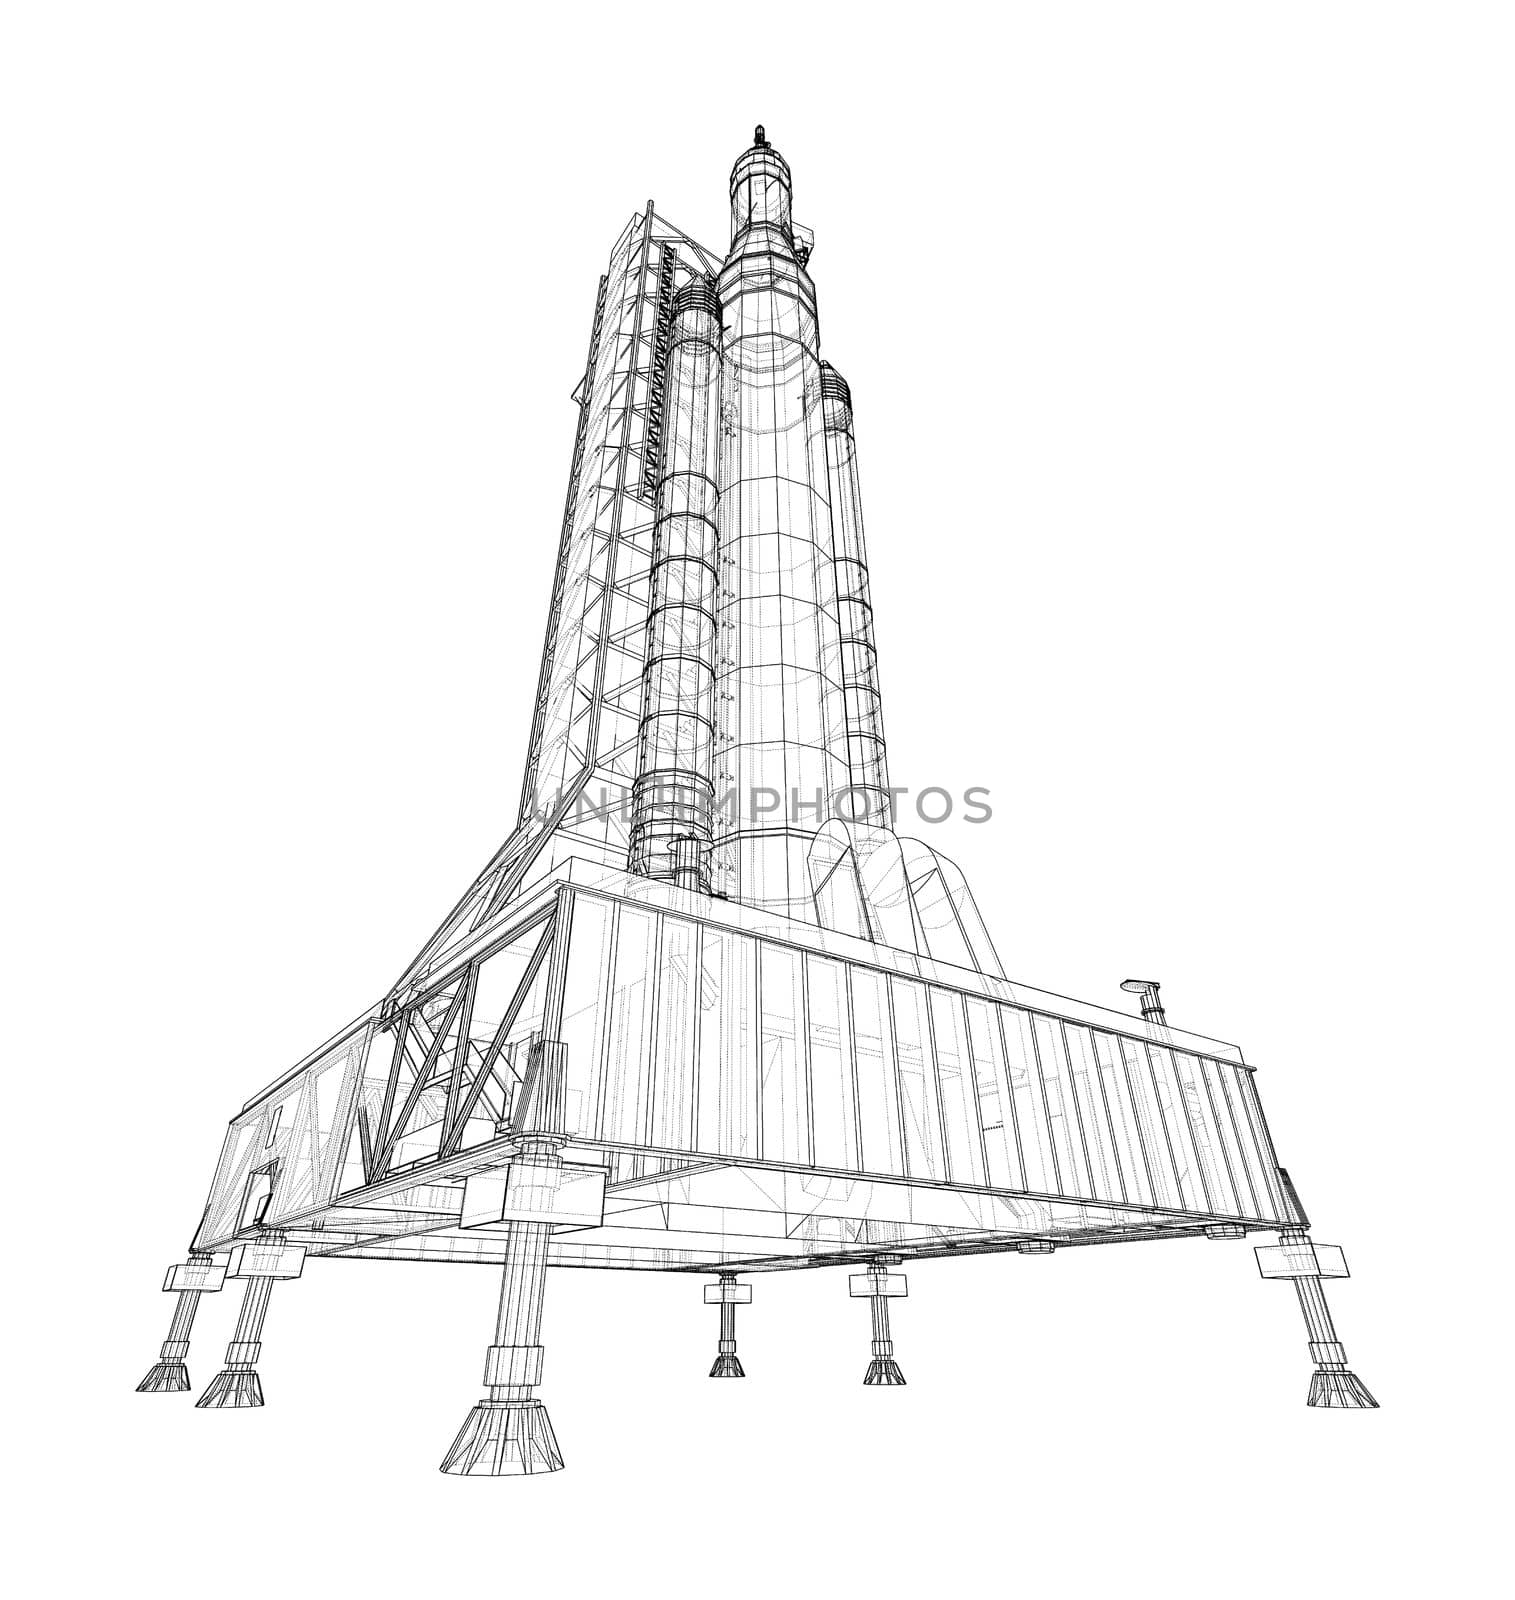 Space Rocket on launch pad. 3d illustration. Wire-frame style. Elements of this image furnished by NASA